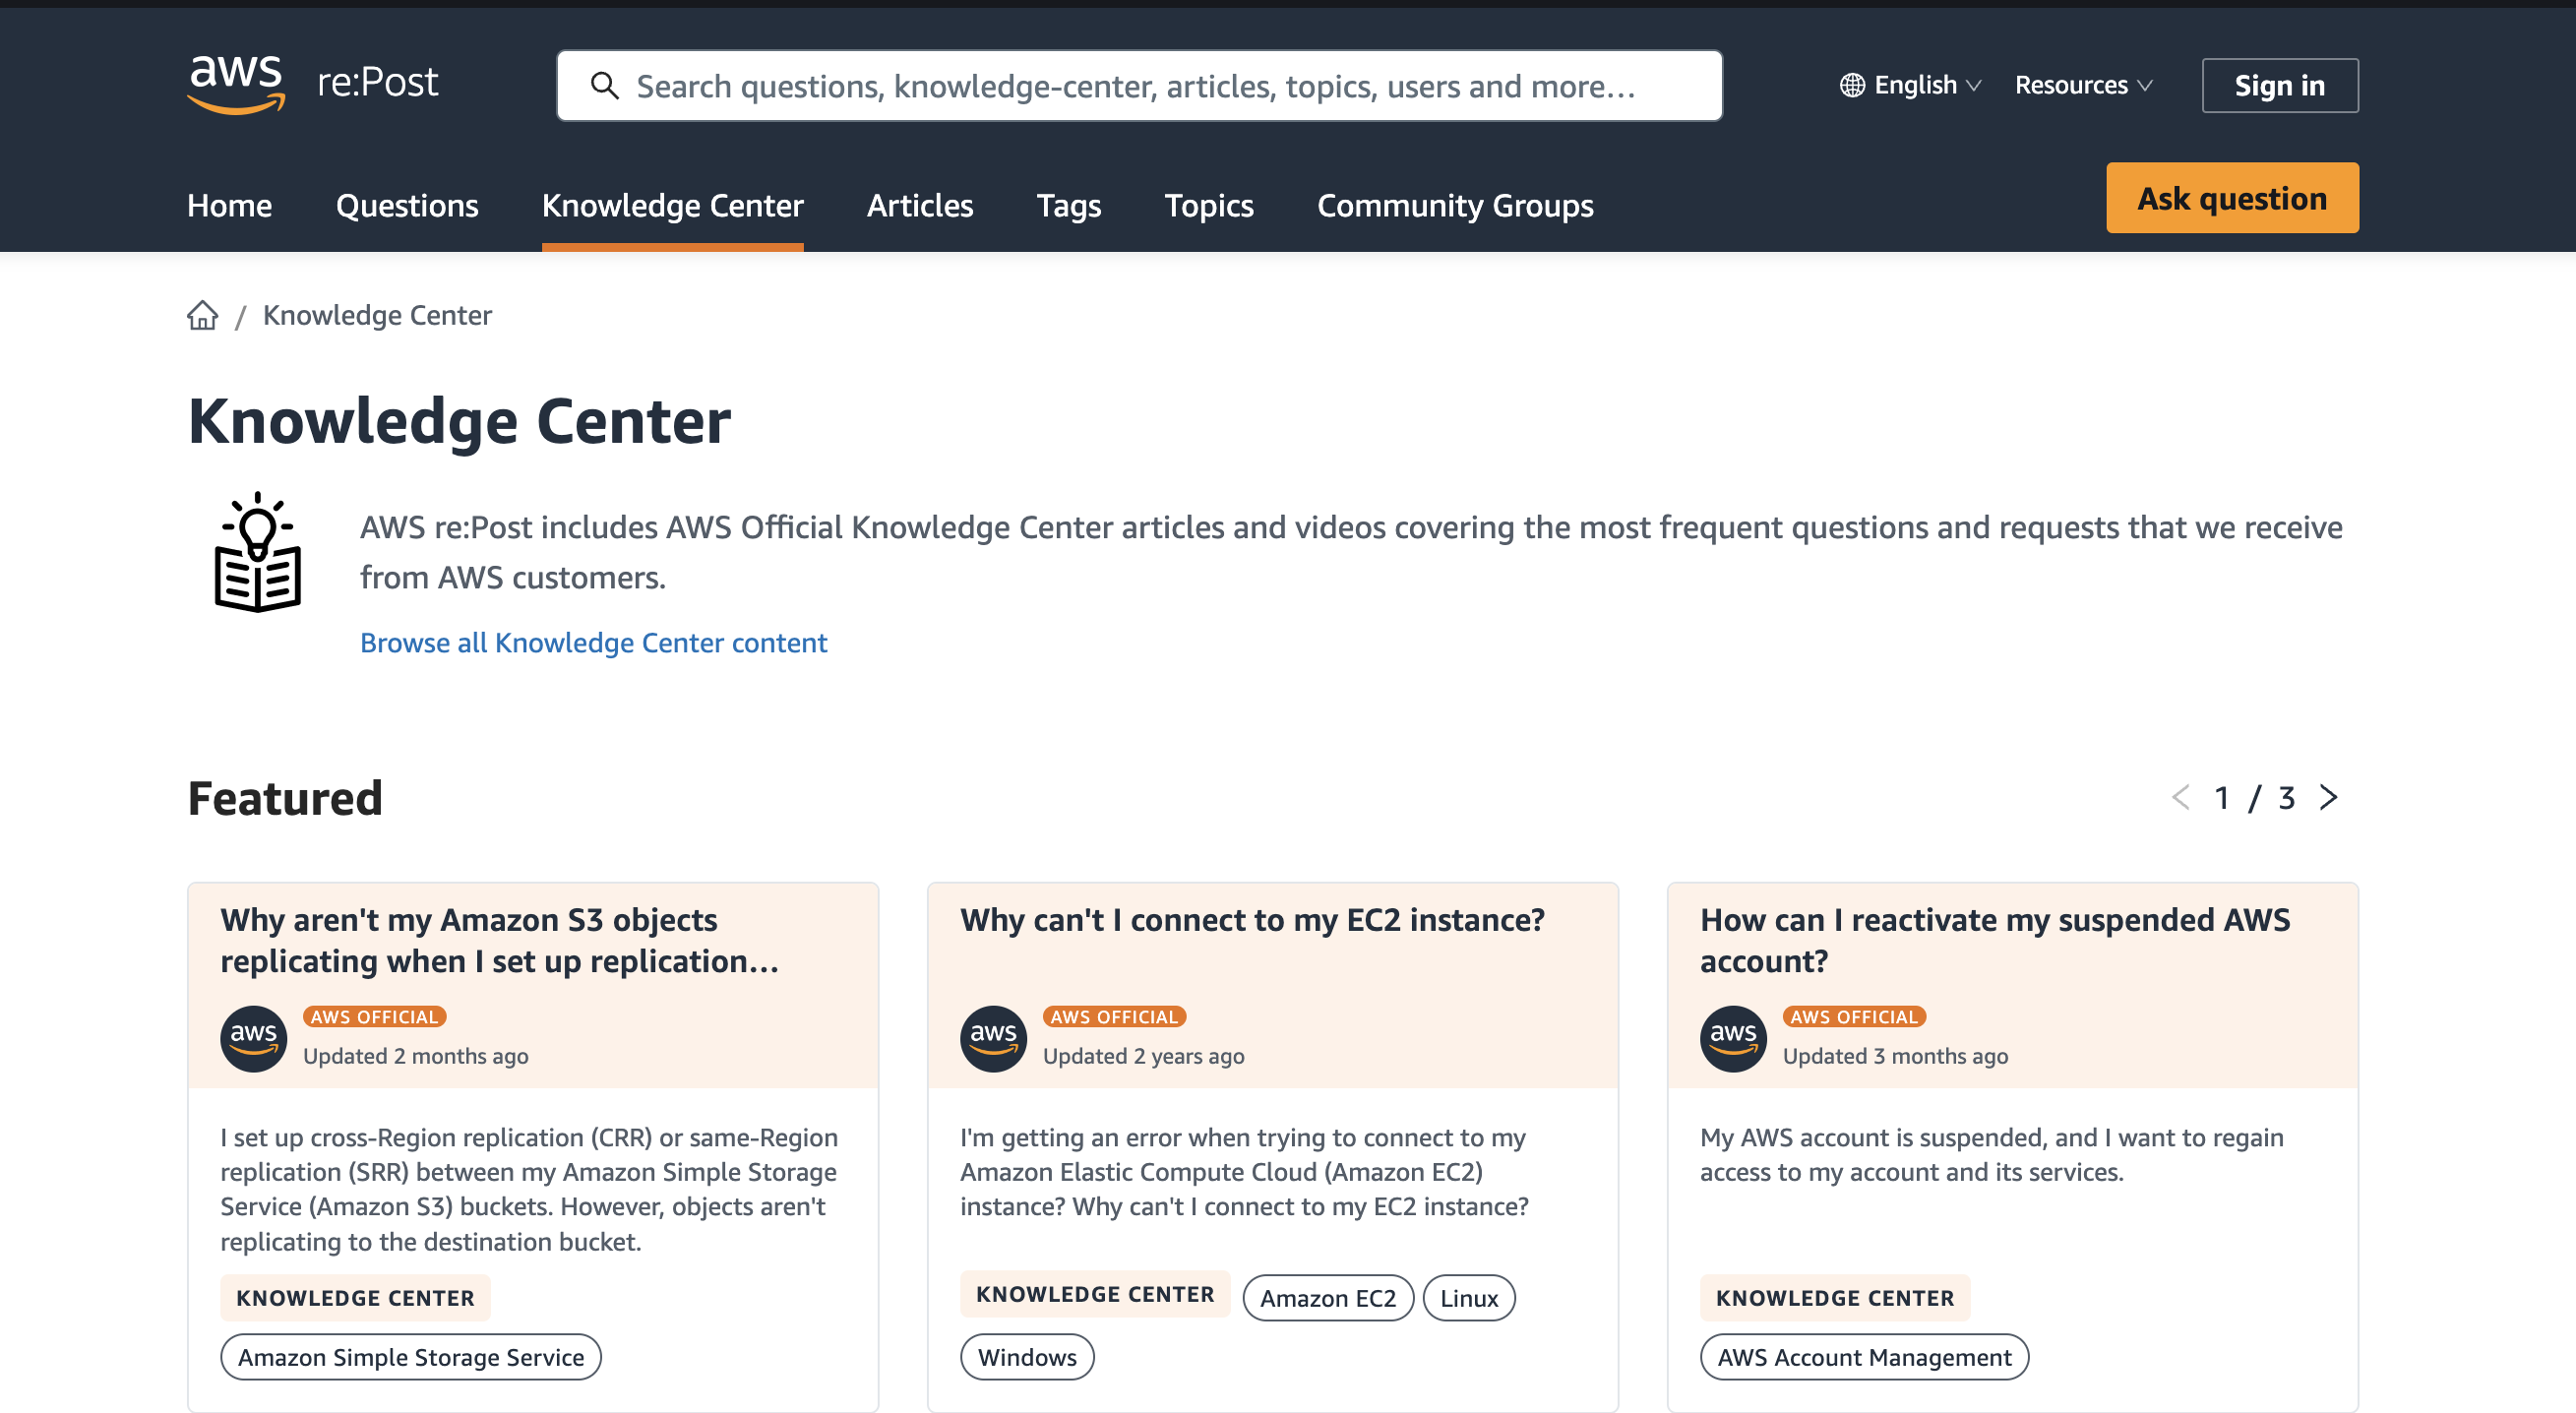 AWS knowledge center with common usability issues